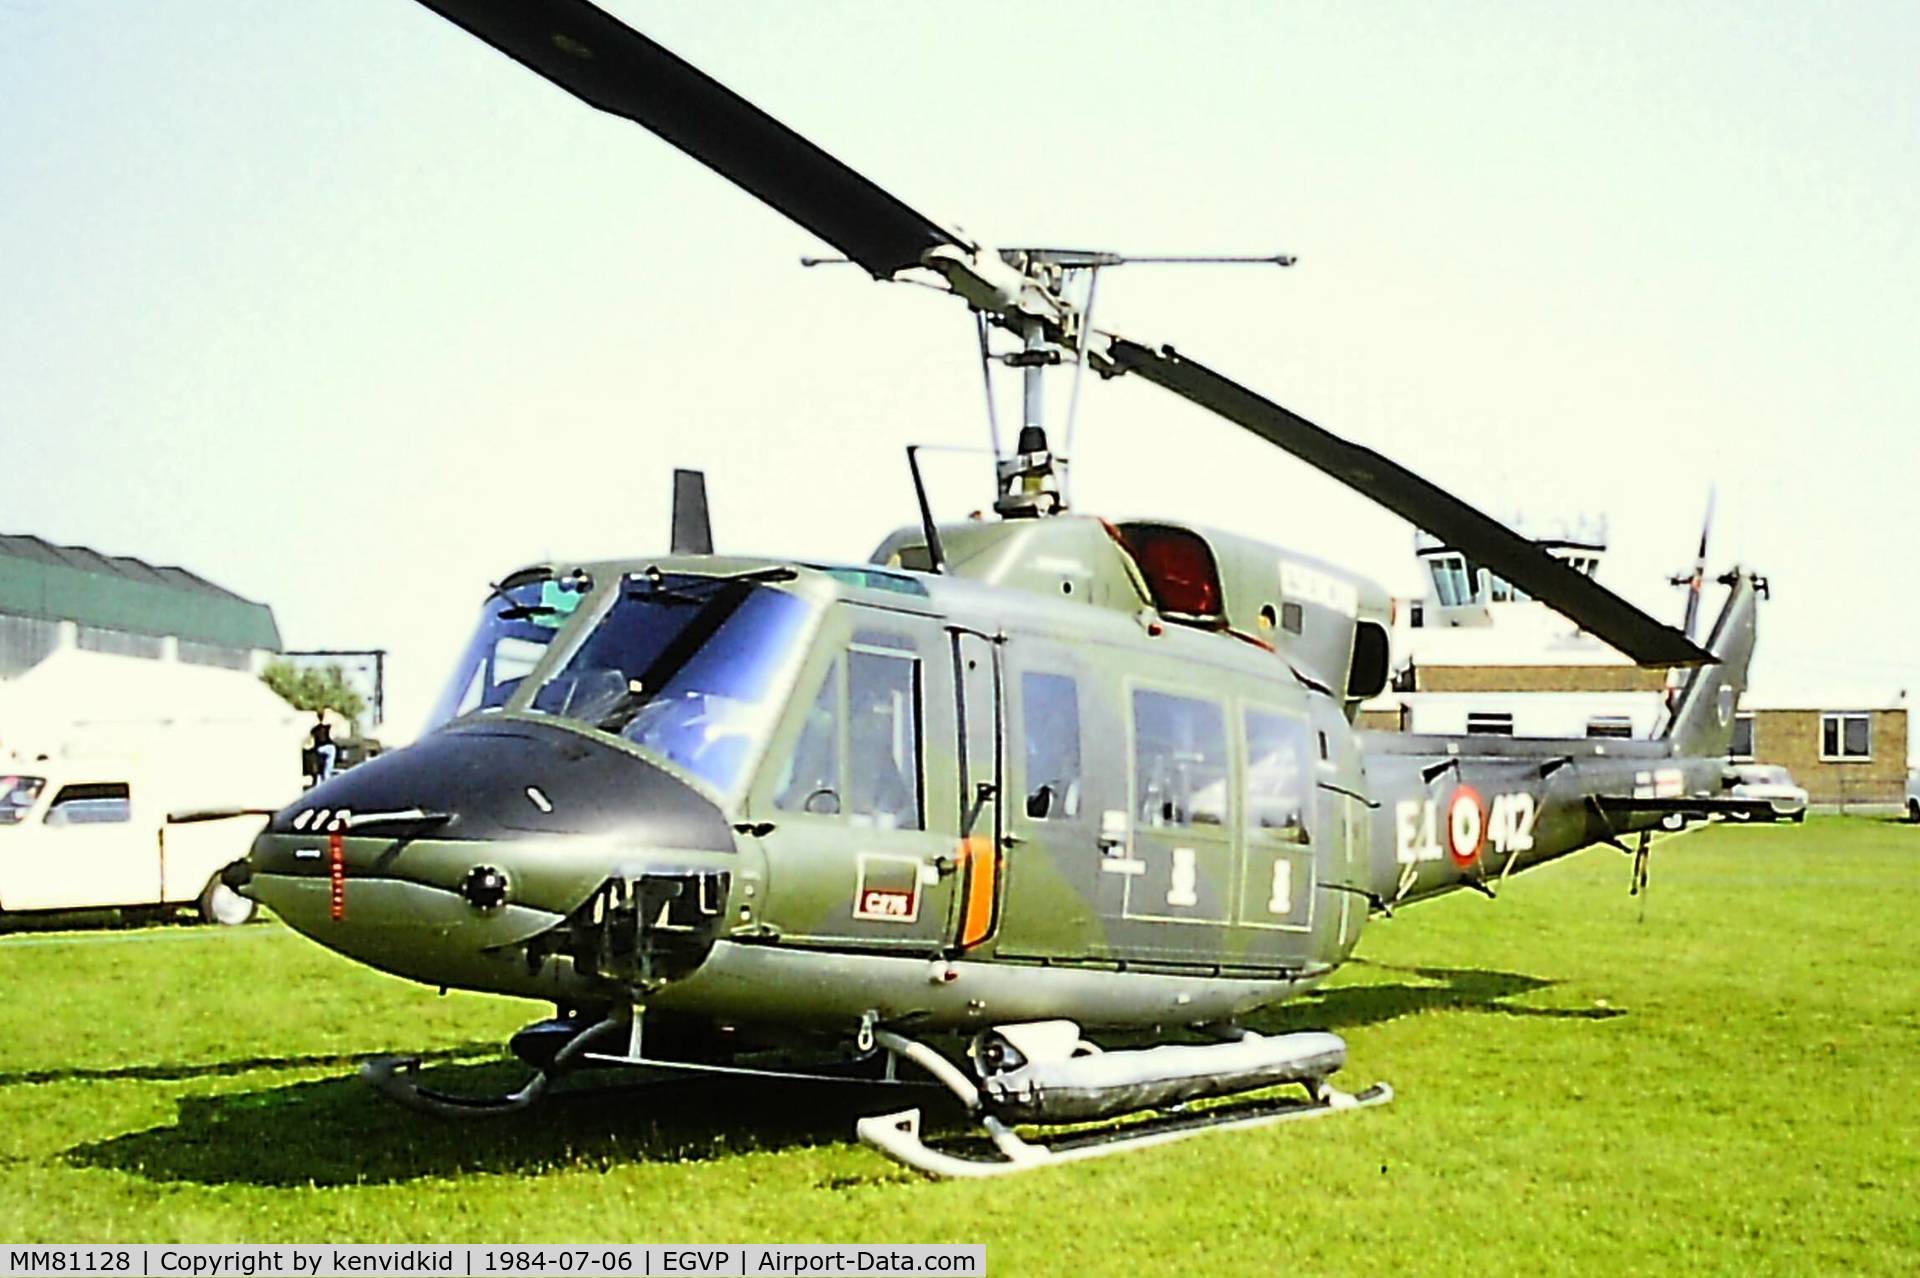 MM81128, Agusta AB-212 C/N 5648, At the 1984 Middle Wallop air show.